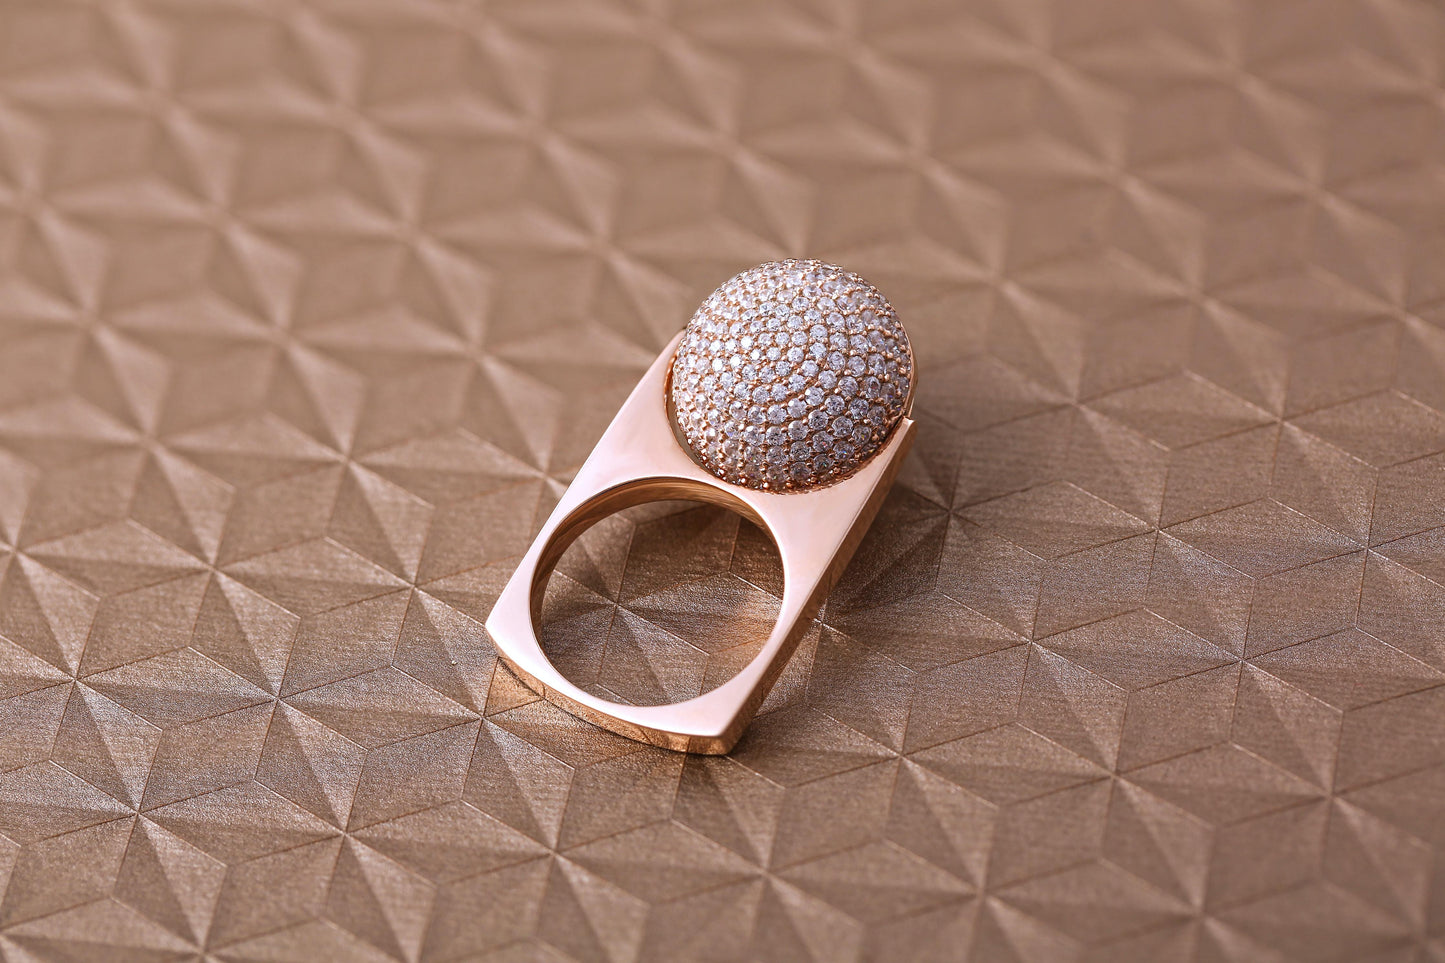 Silver Diamond Studded Ring on Brown Textile